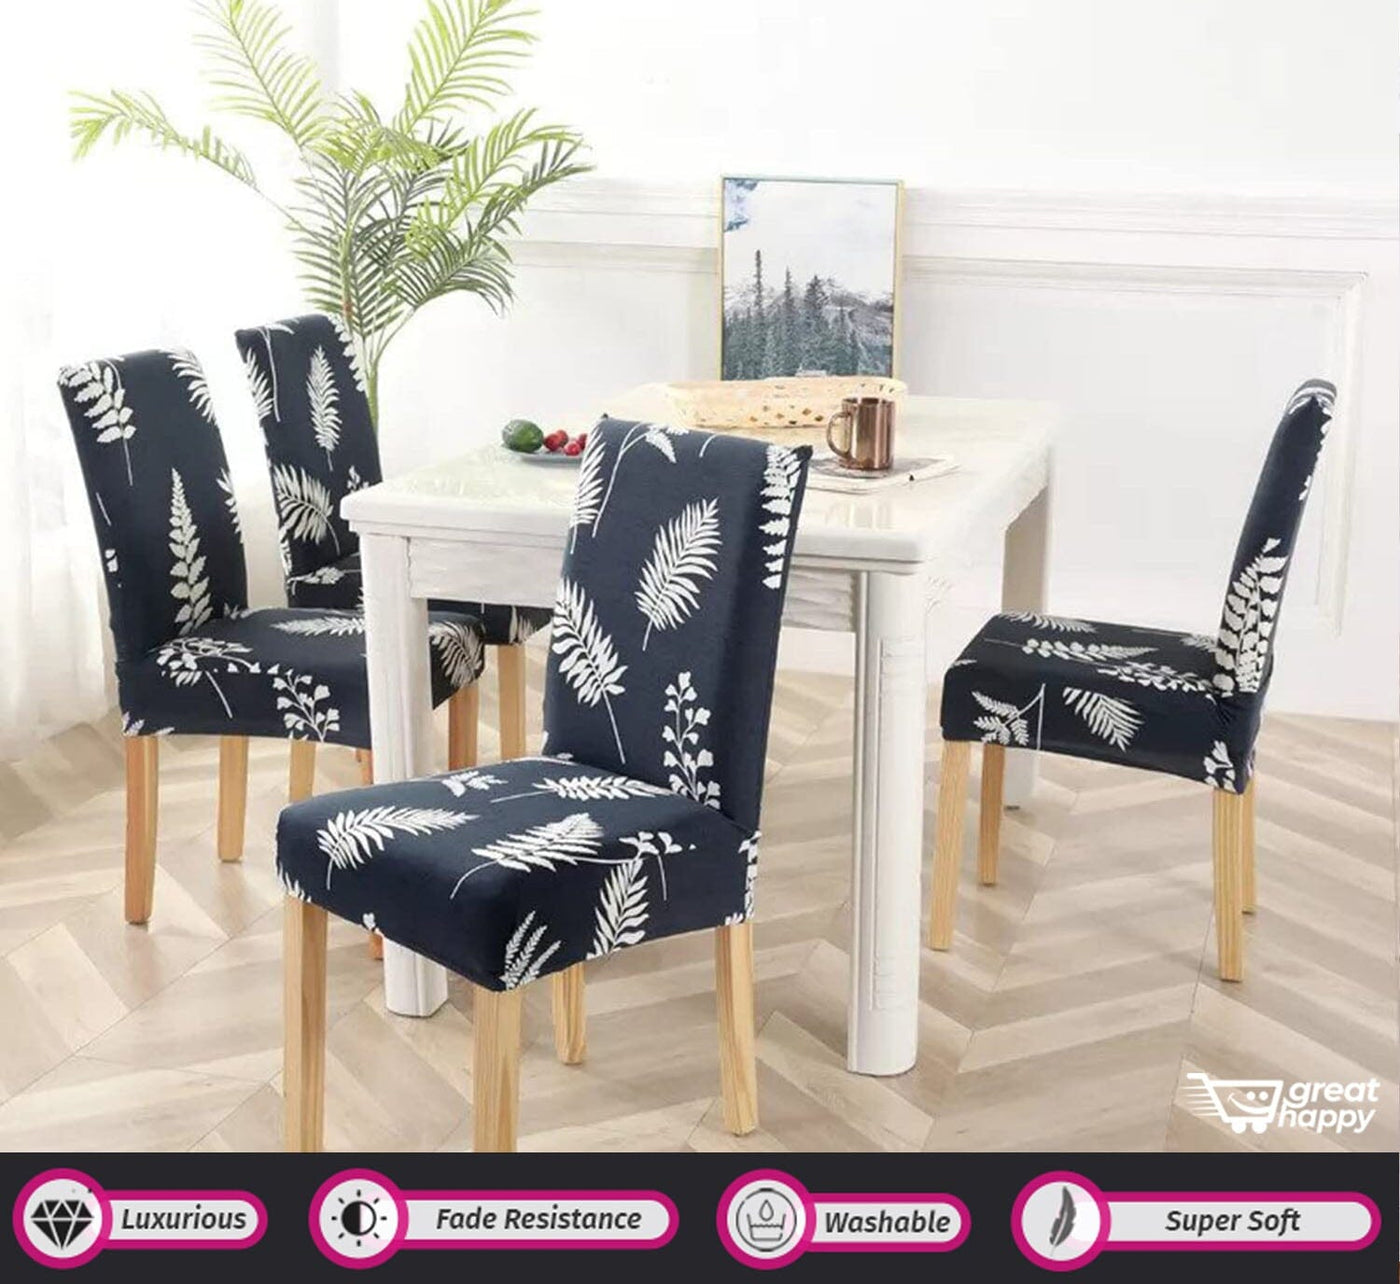 Dark Blue Petals Premium Chair Cover - Stretchable & Elastic Fitted Great Happy IN 2 PCS - ₹799 